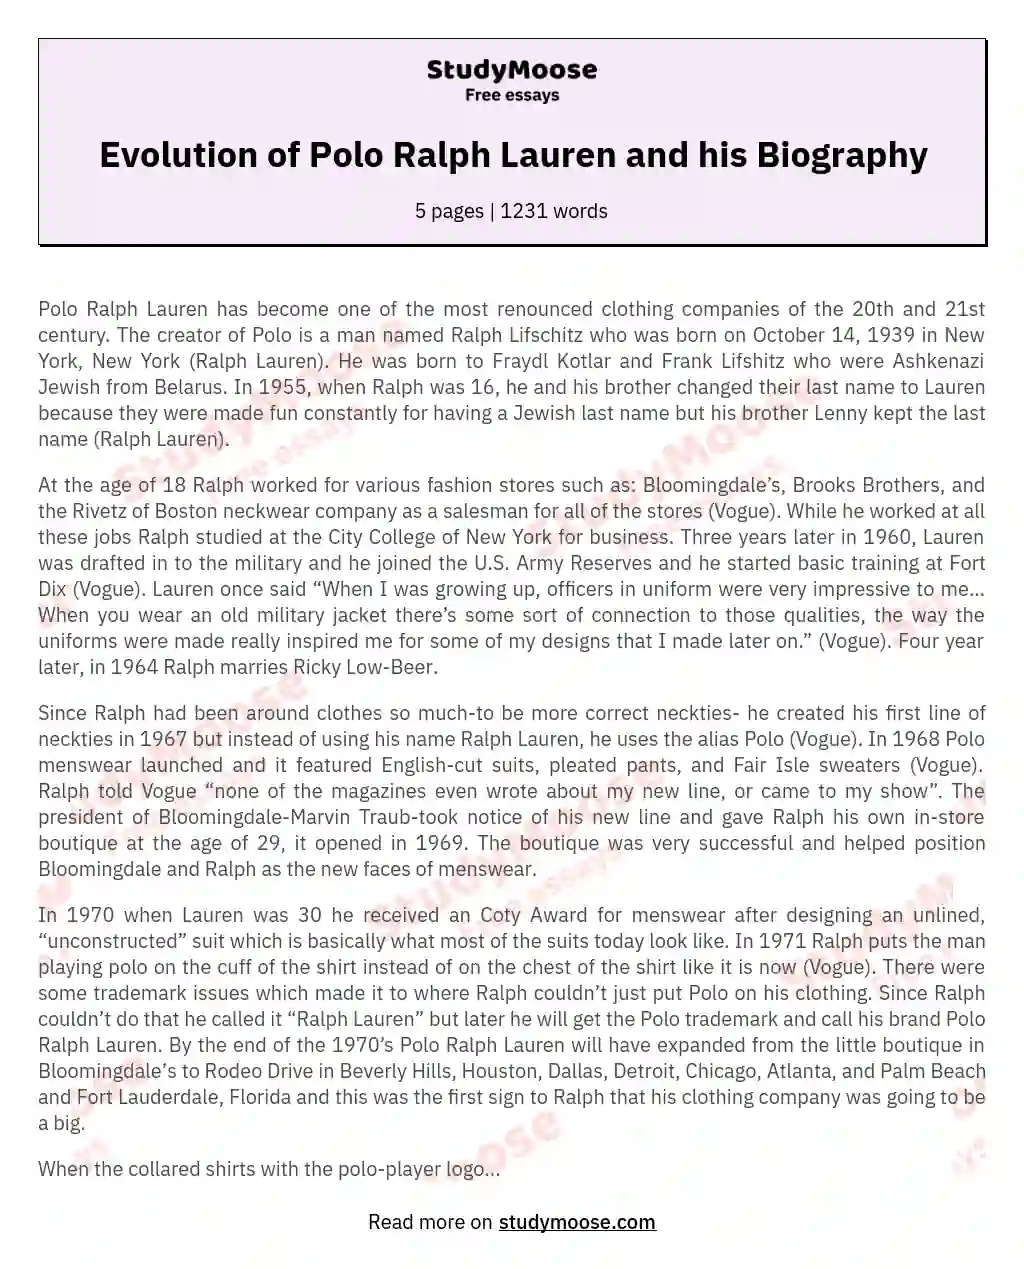 Evolution of Polo Ralph Lauren and his Biography Free Essay Example